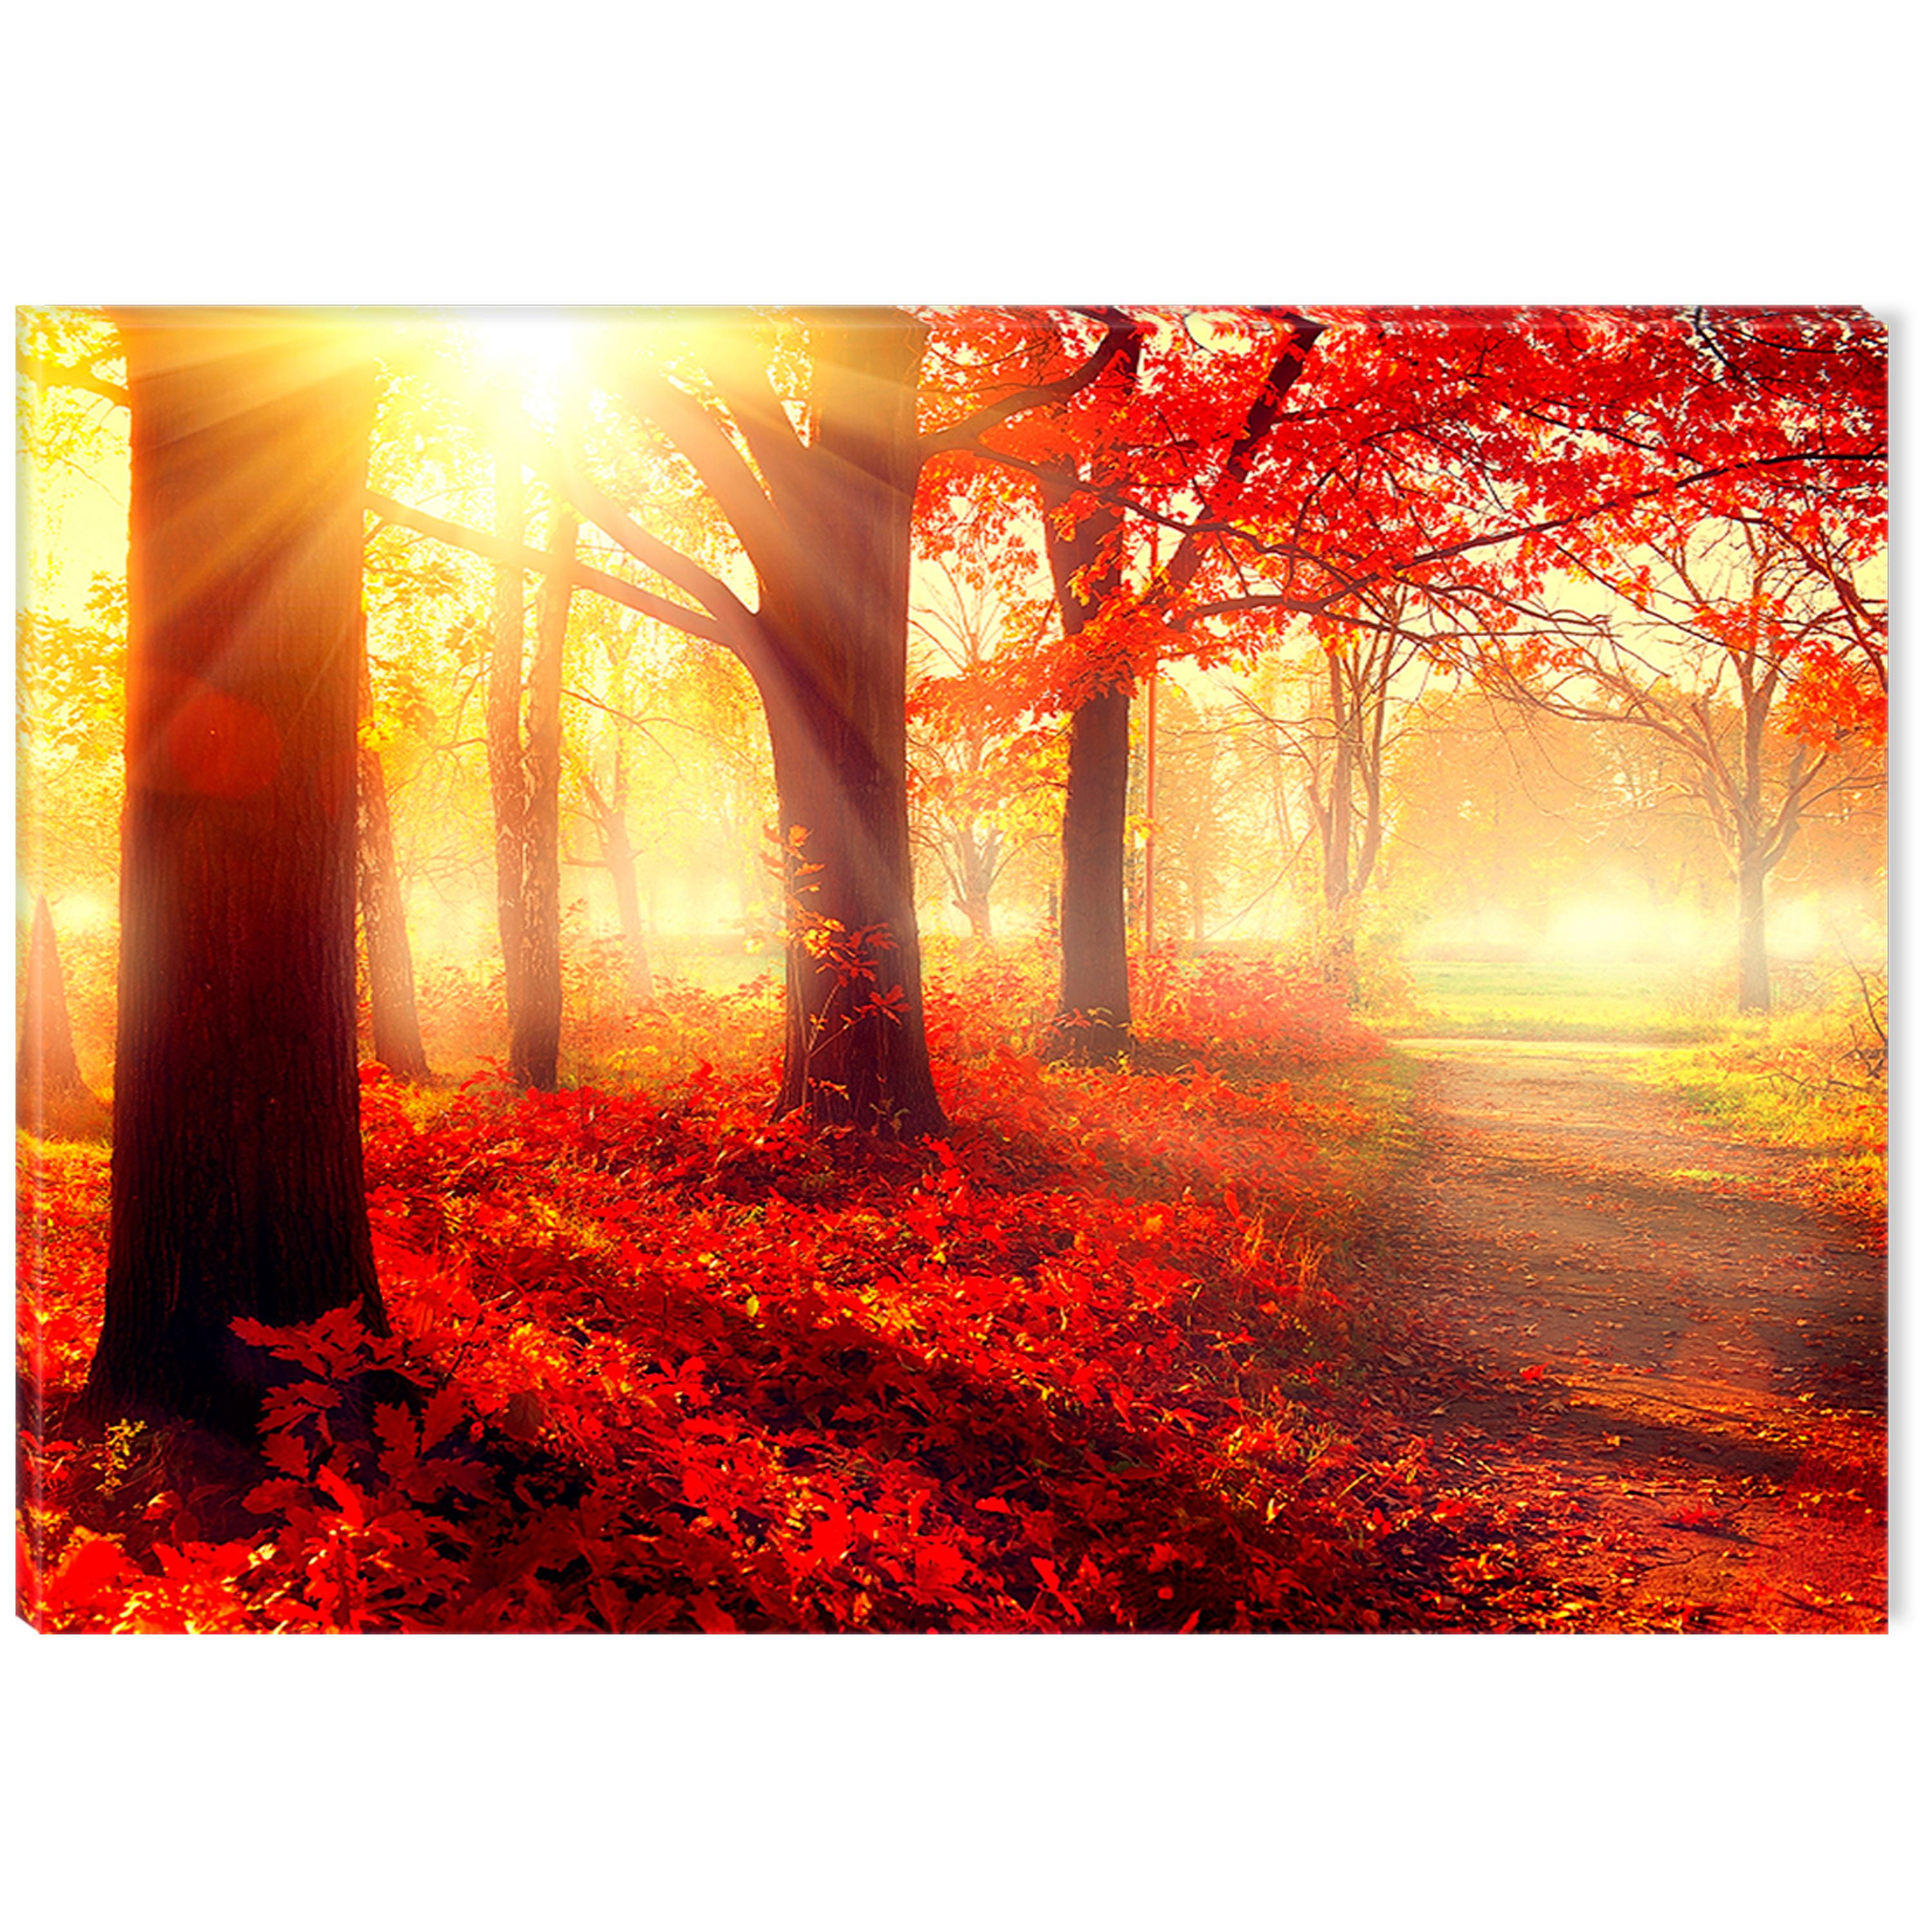 Mystical Horse In The Forest Sunset Trees Modern Design Home Decor Canvas Print Wall Art Picture